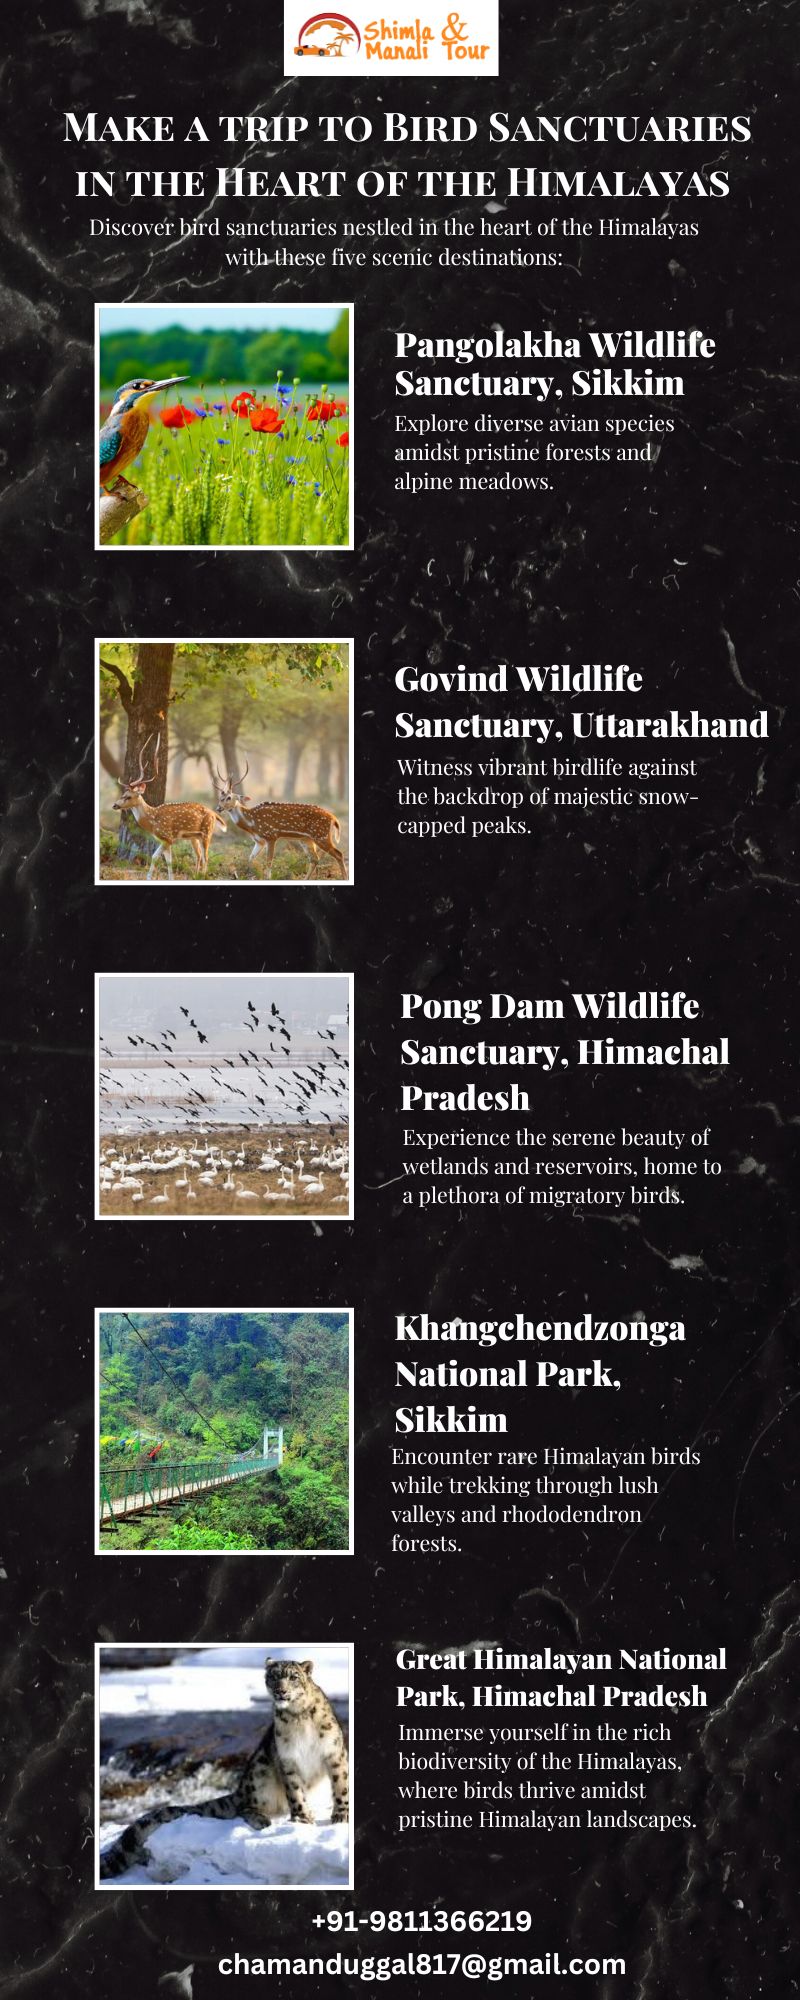 _Make A Trip To Bird Sanctuaries In The Heart Of The Himalayas 5 April